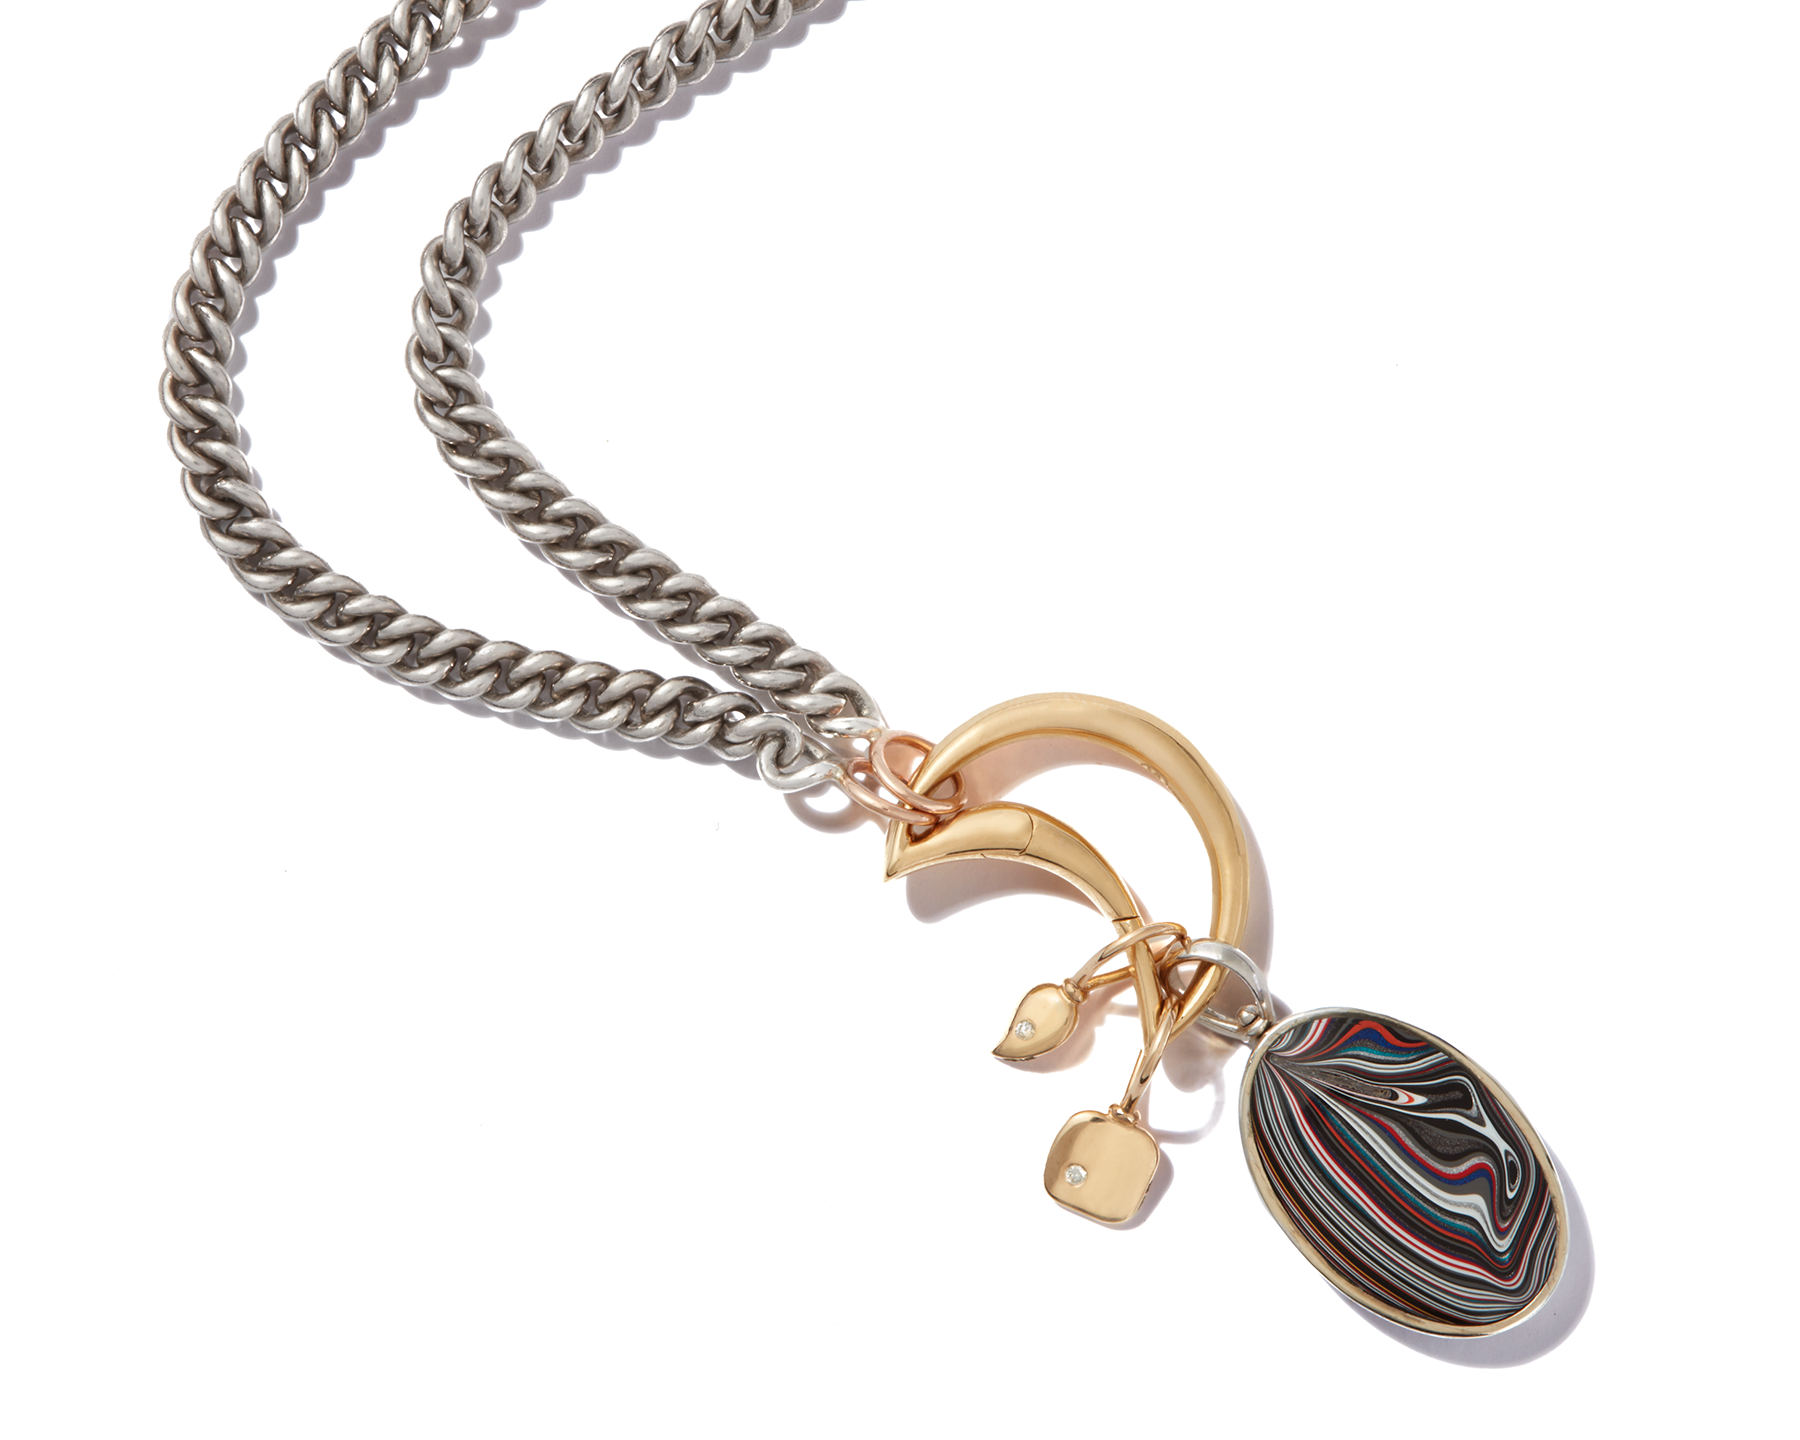 Close up of necklace with gold moon charm and fordite charm